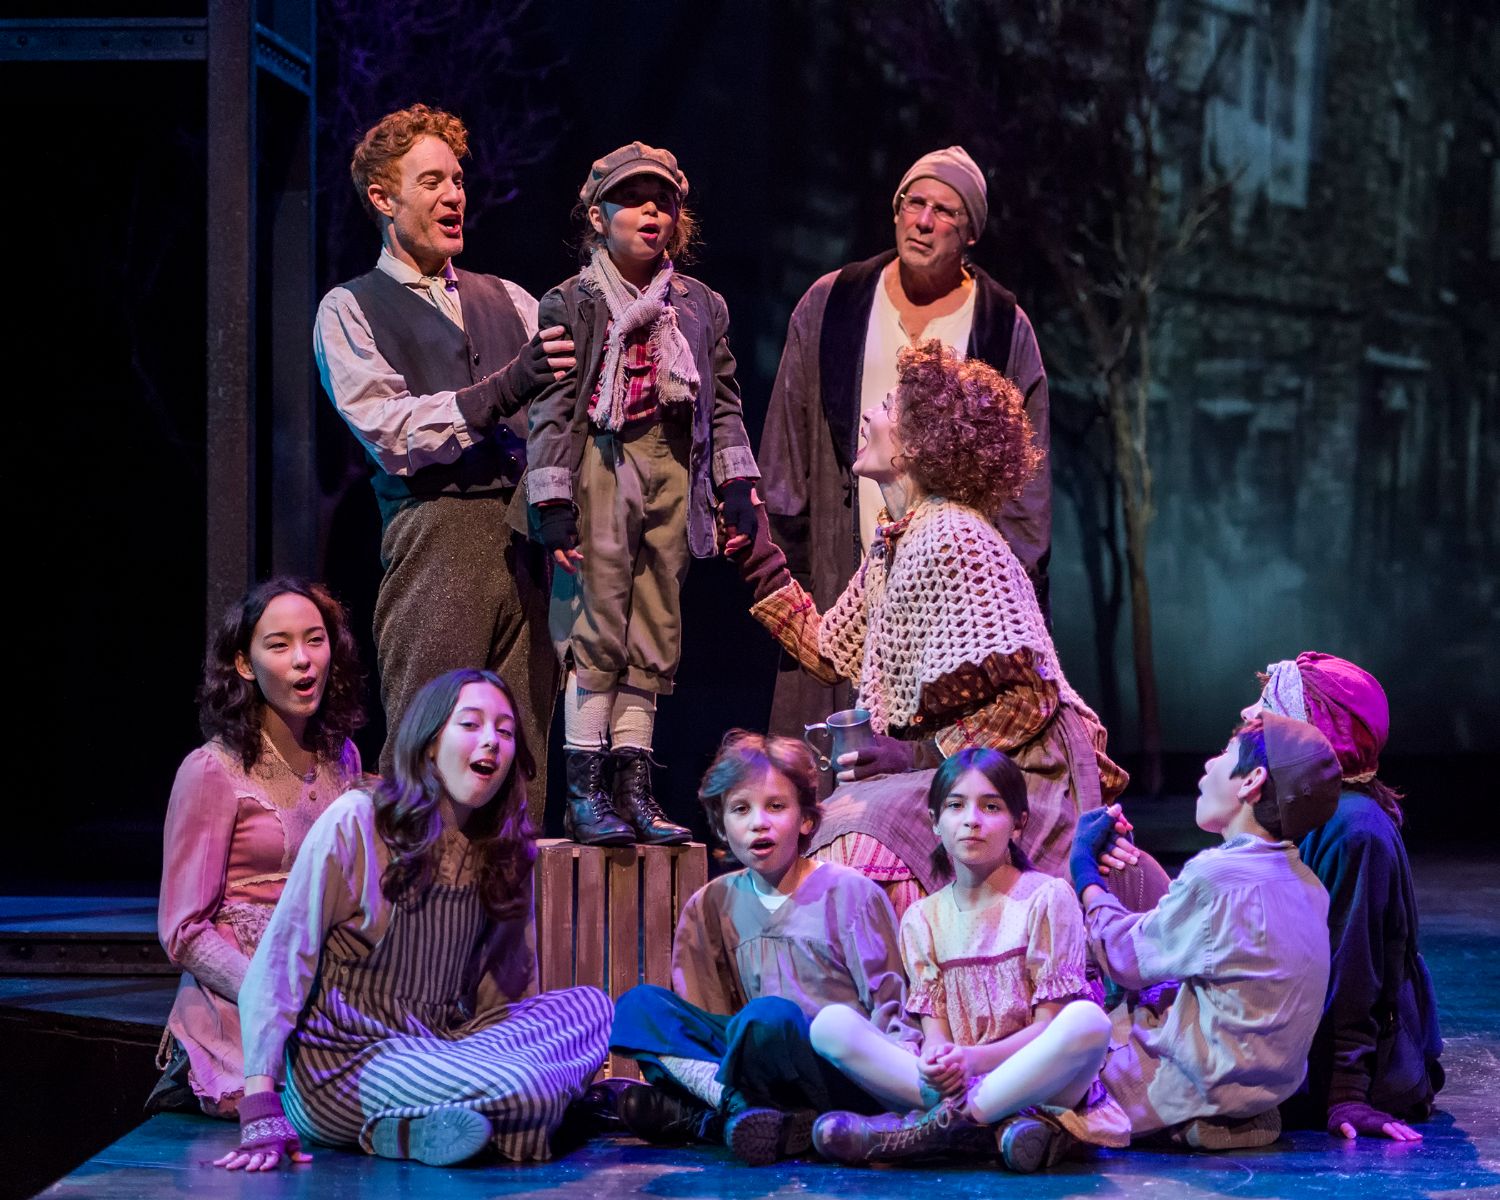 PHOTO: Craig Schwartz | The South Pasadenan | The cast of A Christmas Carol at A Noise Within.